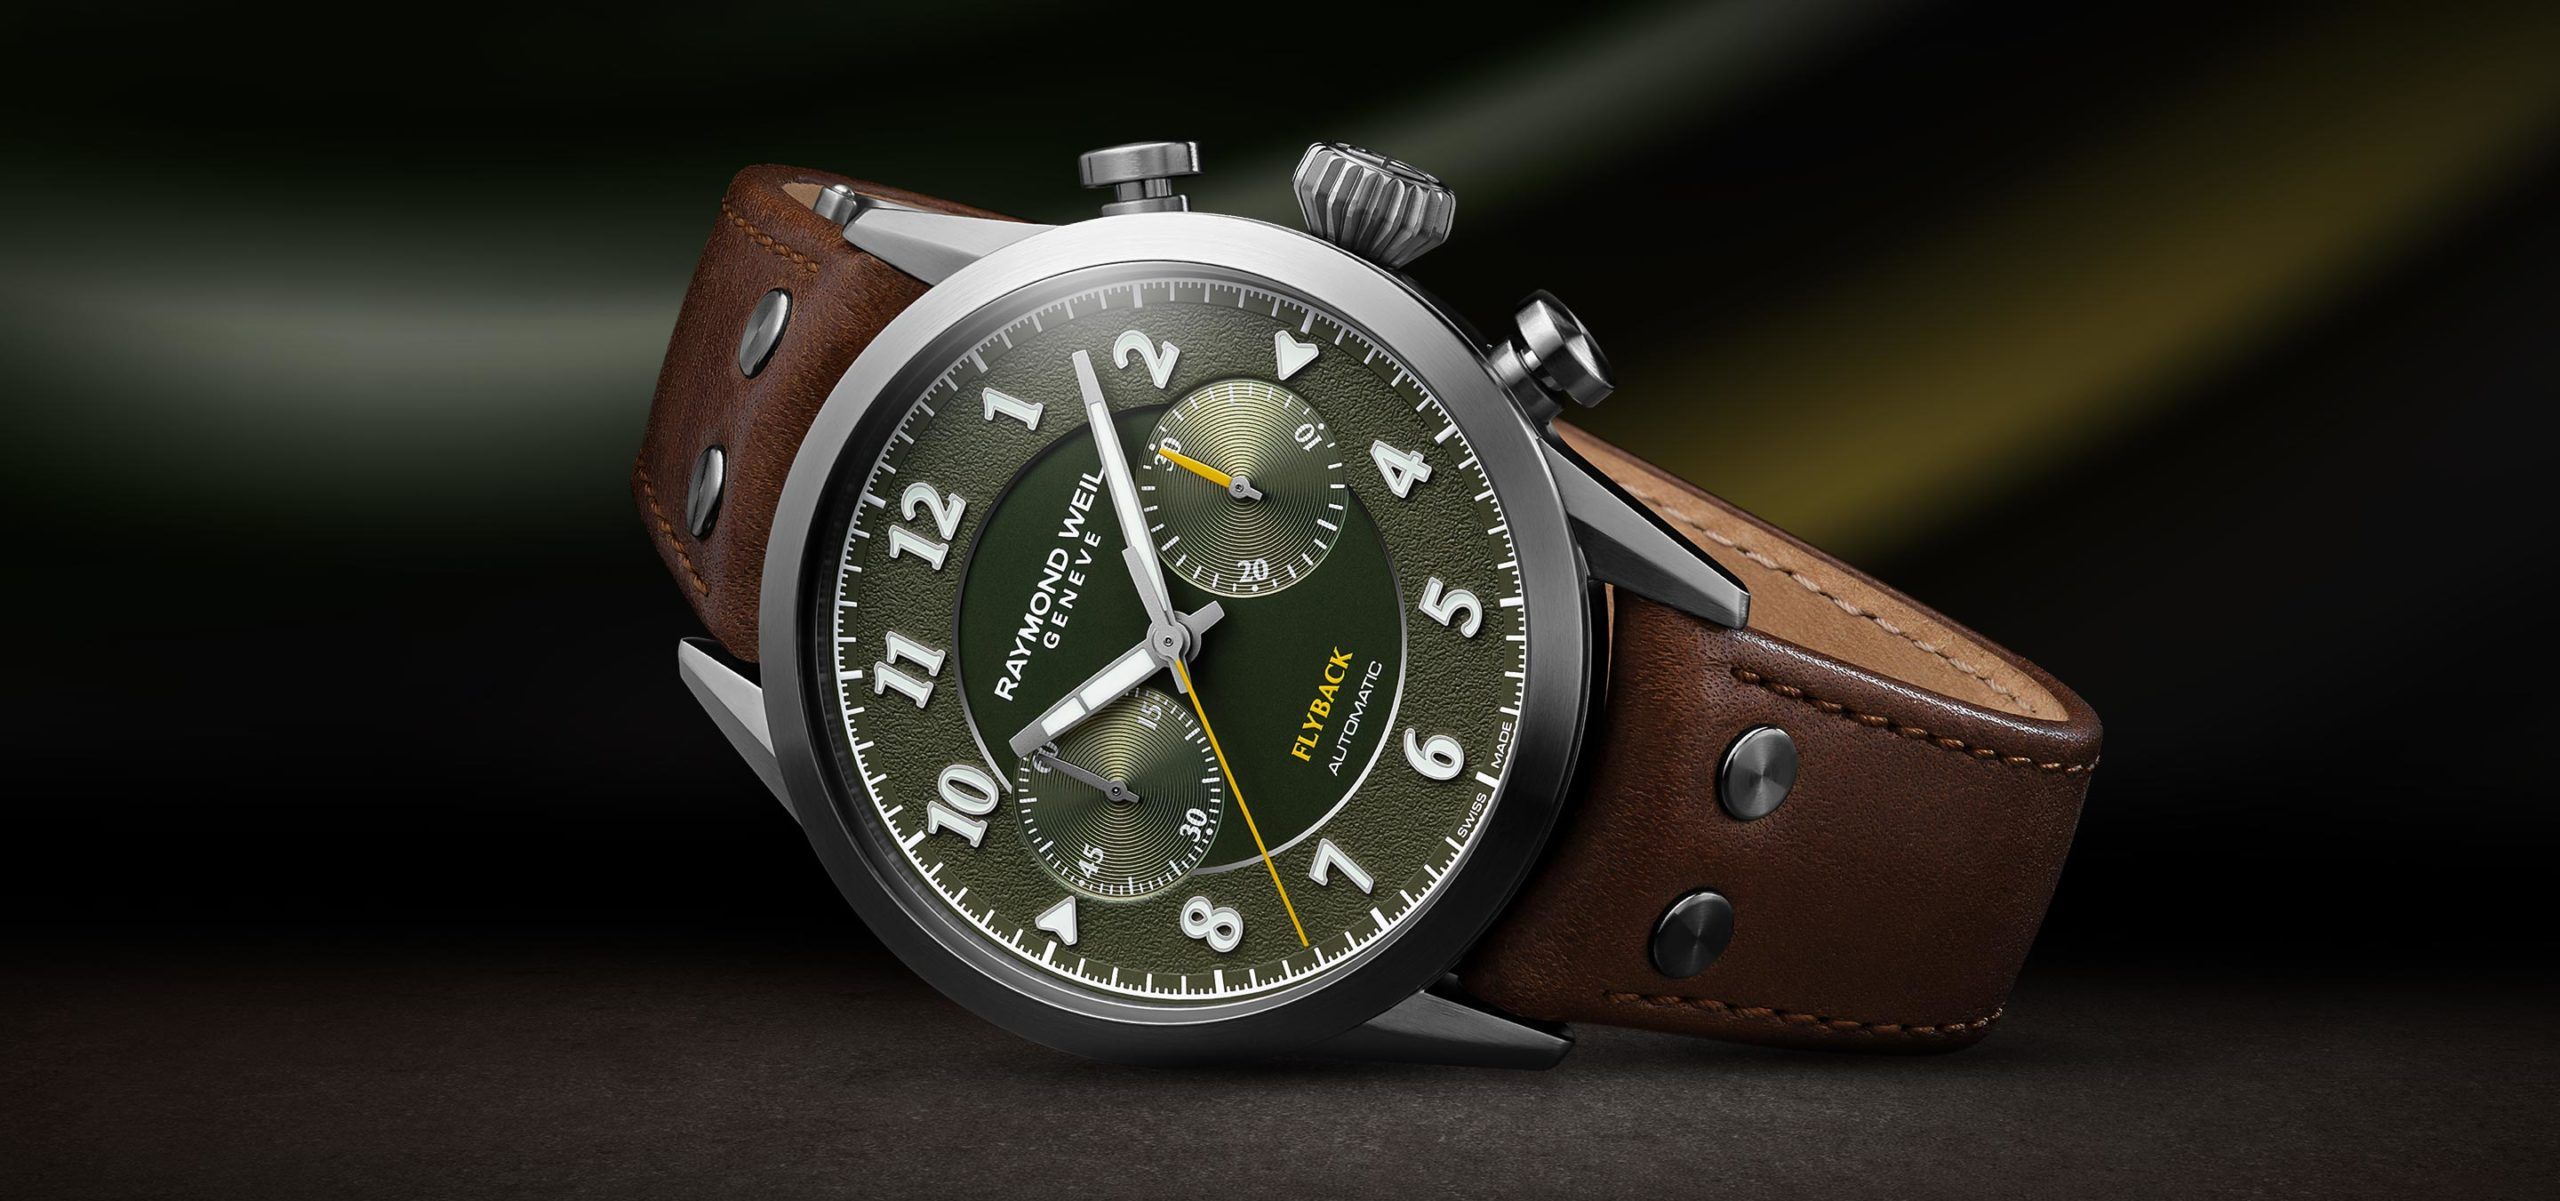 All In The Family: Introducing The Raymond Weil Freelancer Pilot Flyback Chronograph